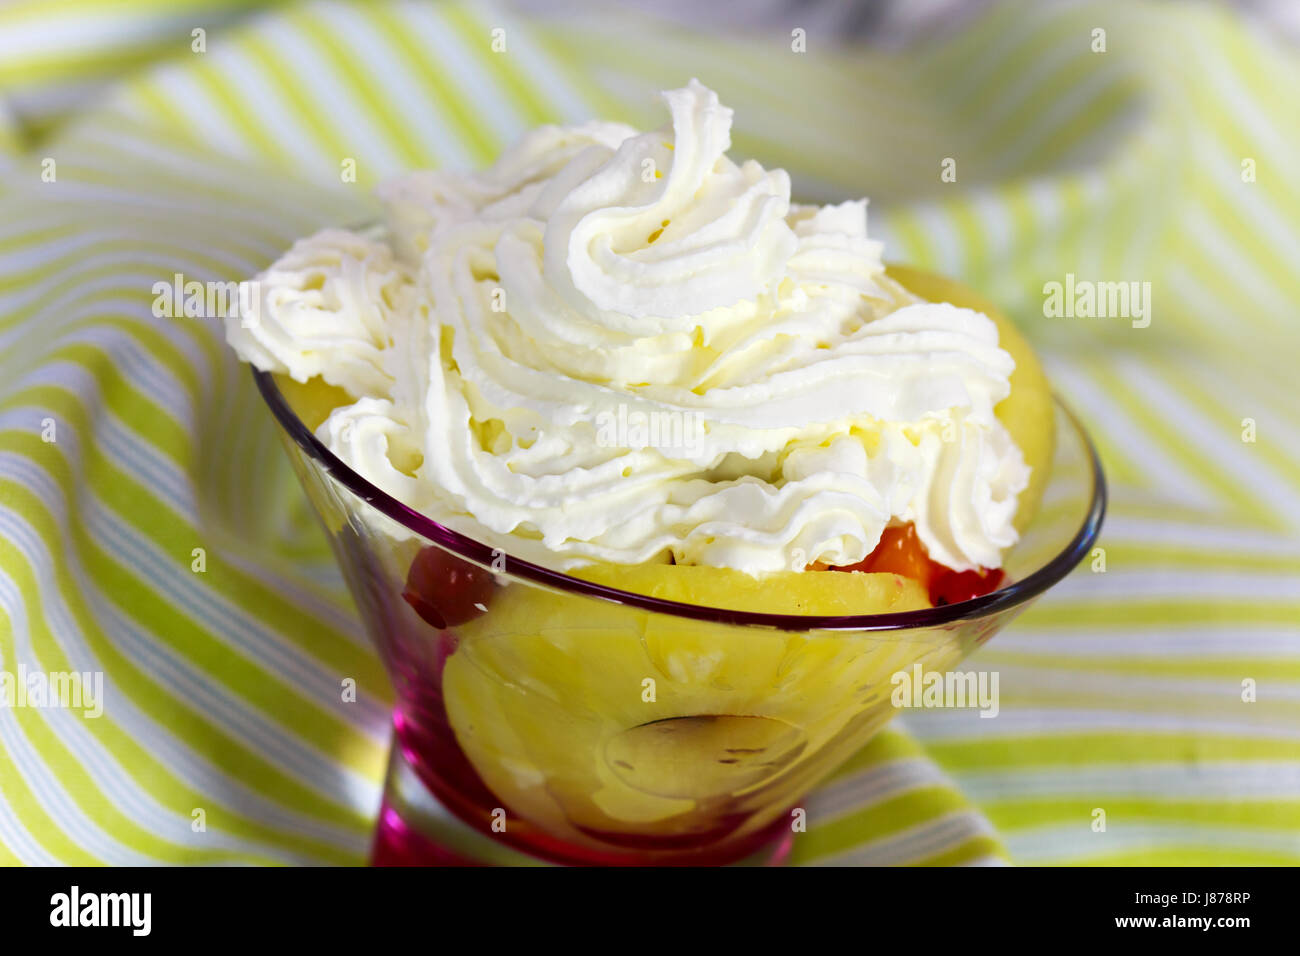 fruit salad,mixed with whipped cream Stock Photo